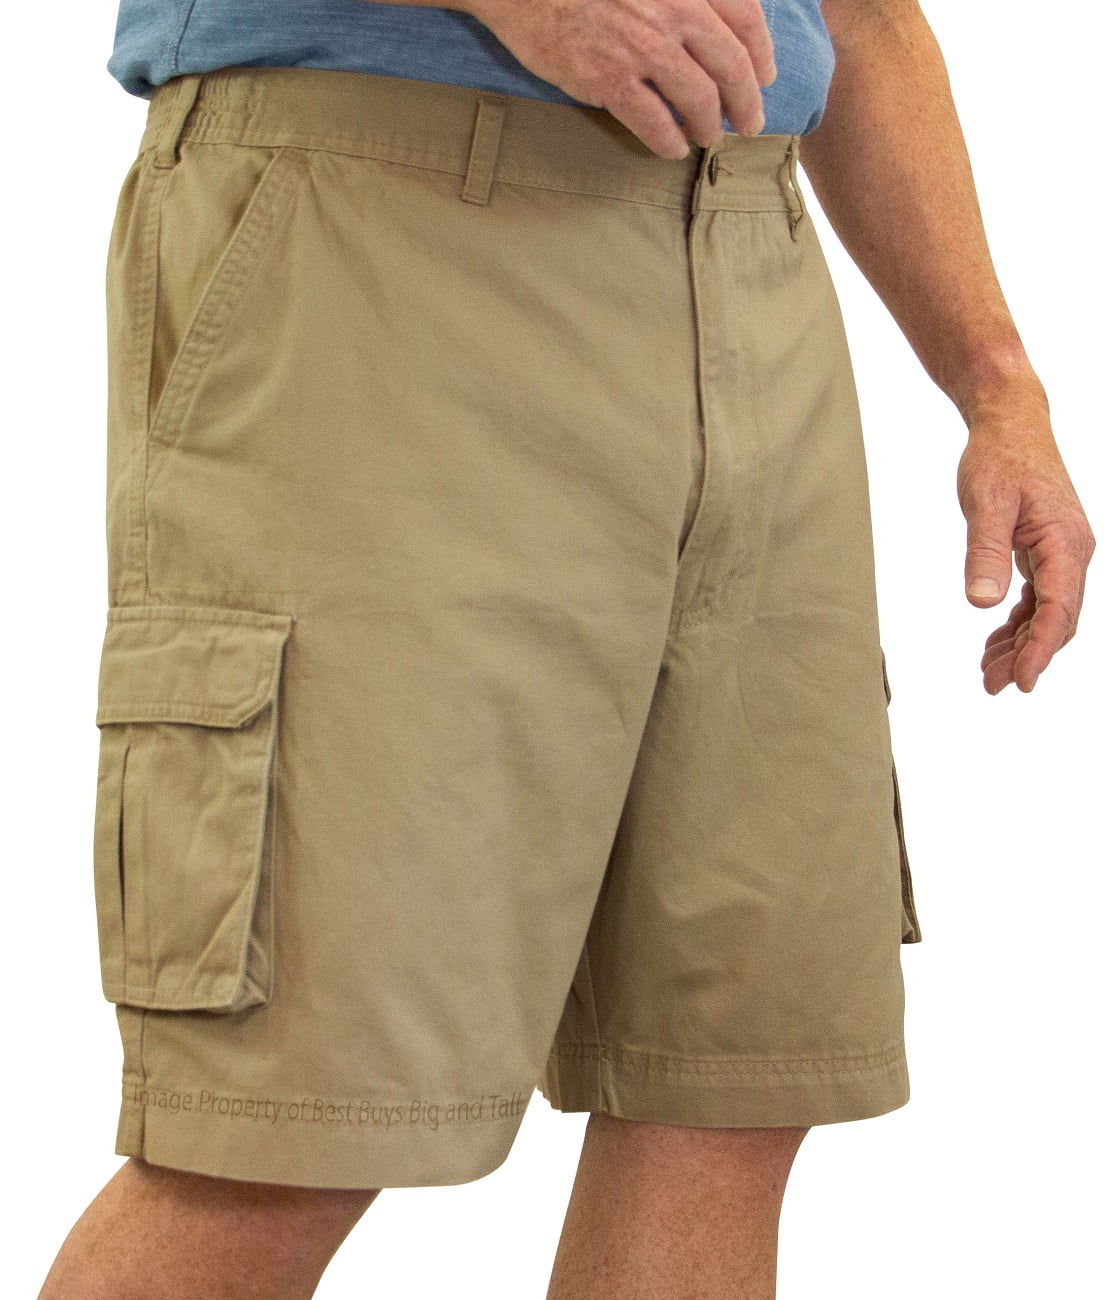 Big & Tall Mens Relaxed Fit Cotton Cargo Shorts CastleRock GRAY Waist Size 50 